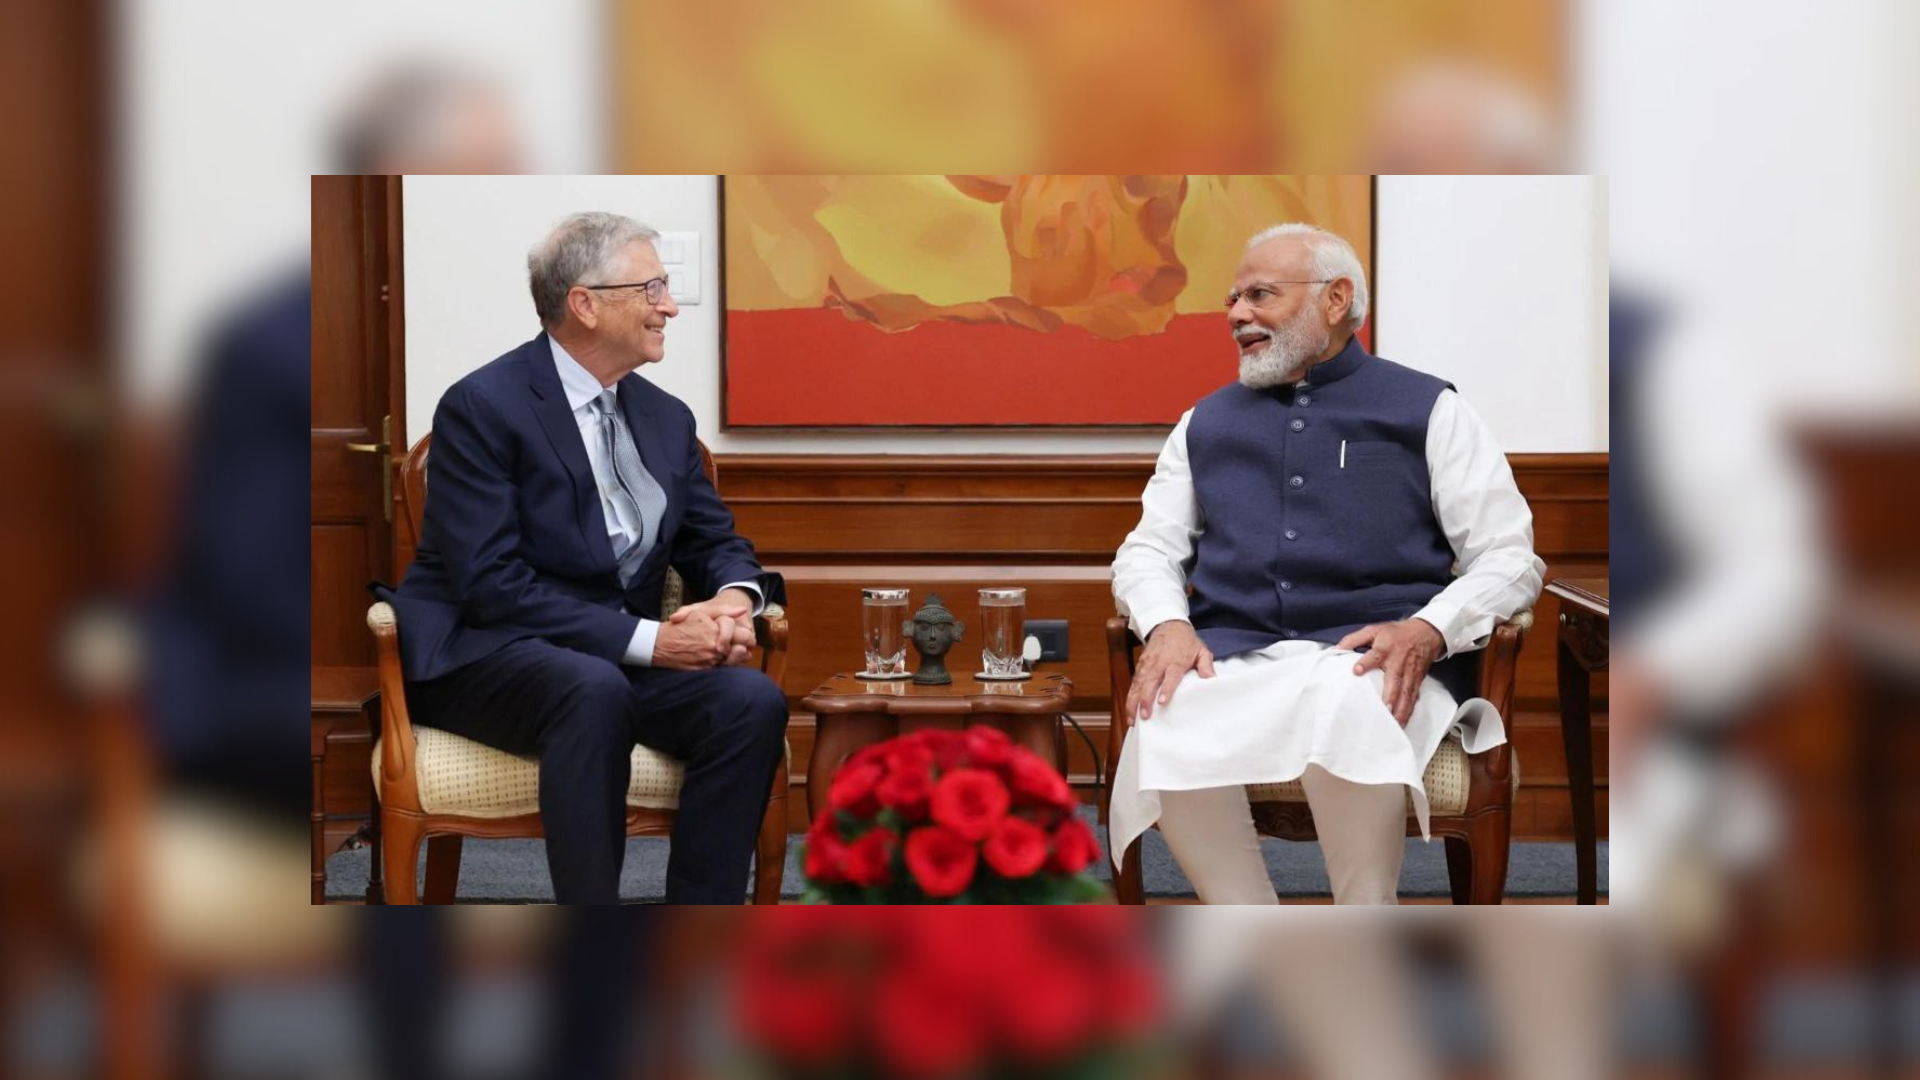 From AI To Digital Payments: Bill Gates And PM Modi To Interact